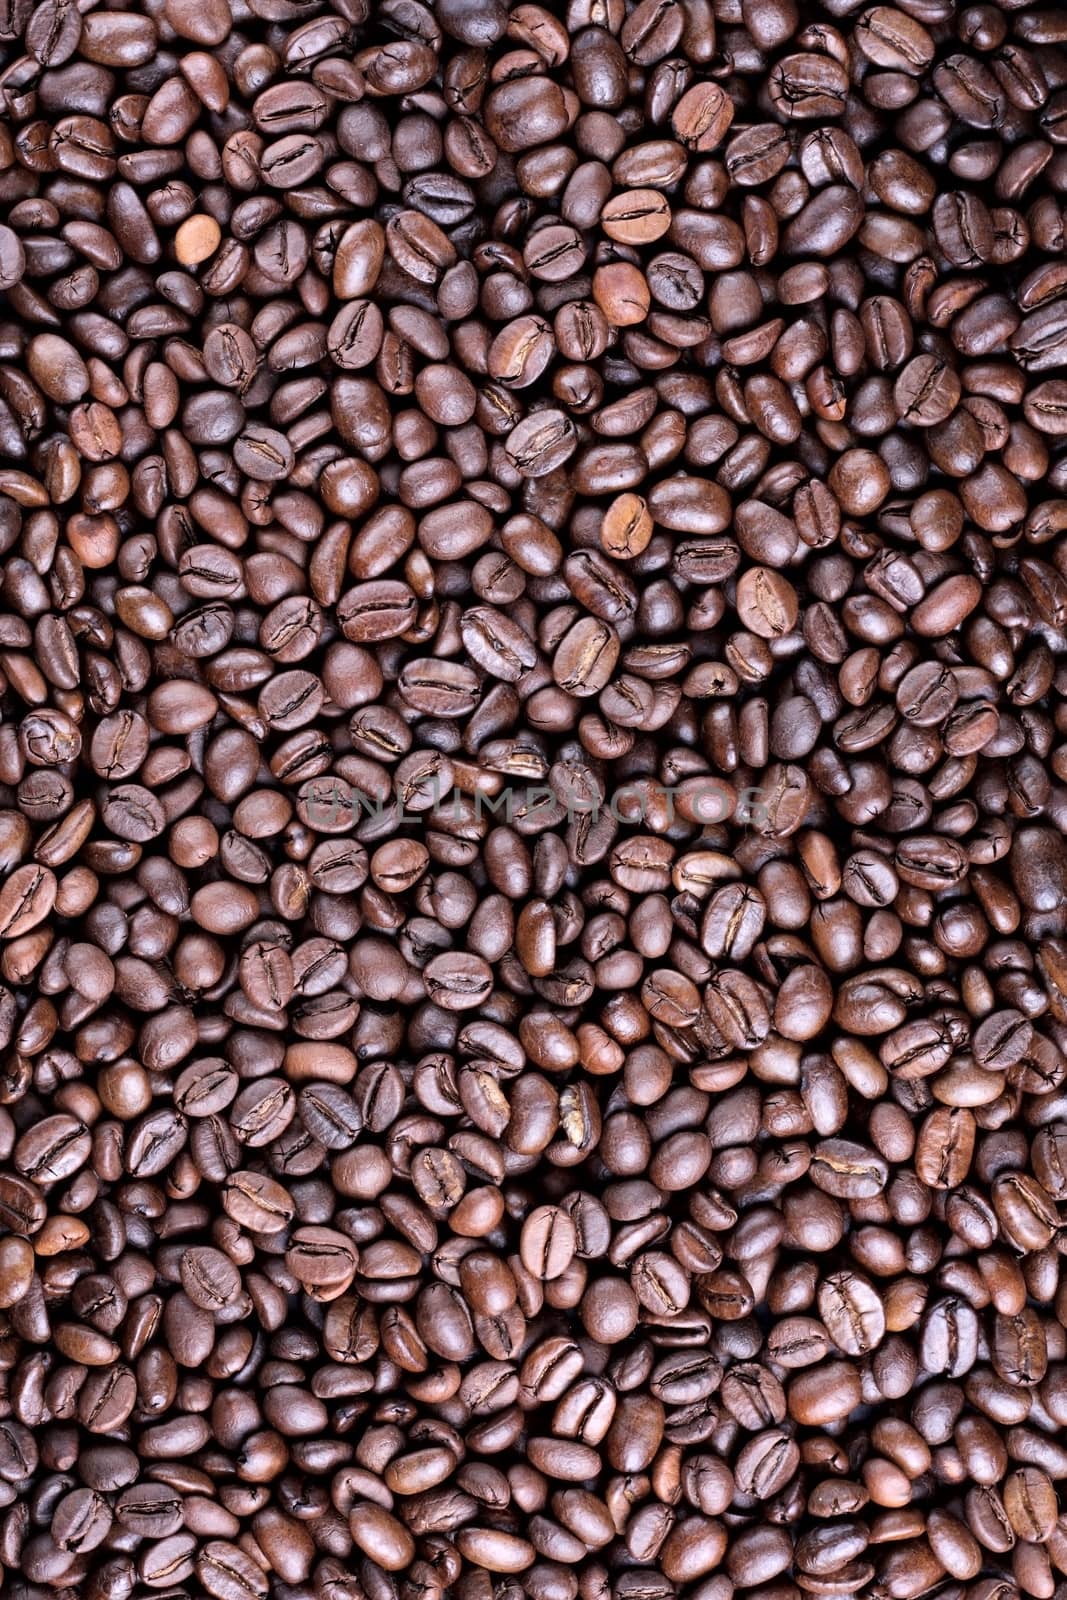 Many brown roasted coffee beans at background